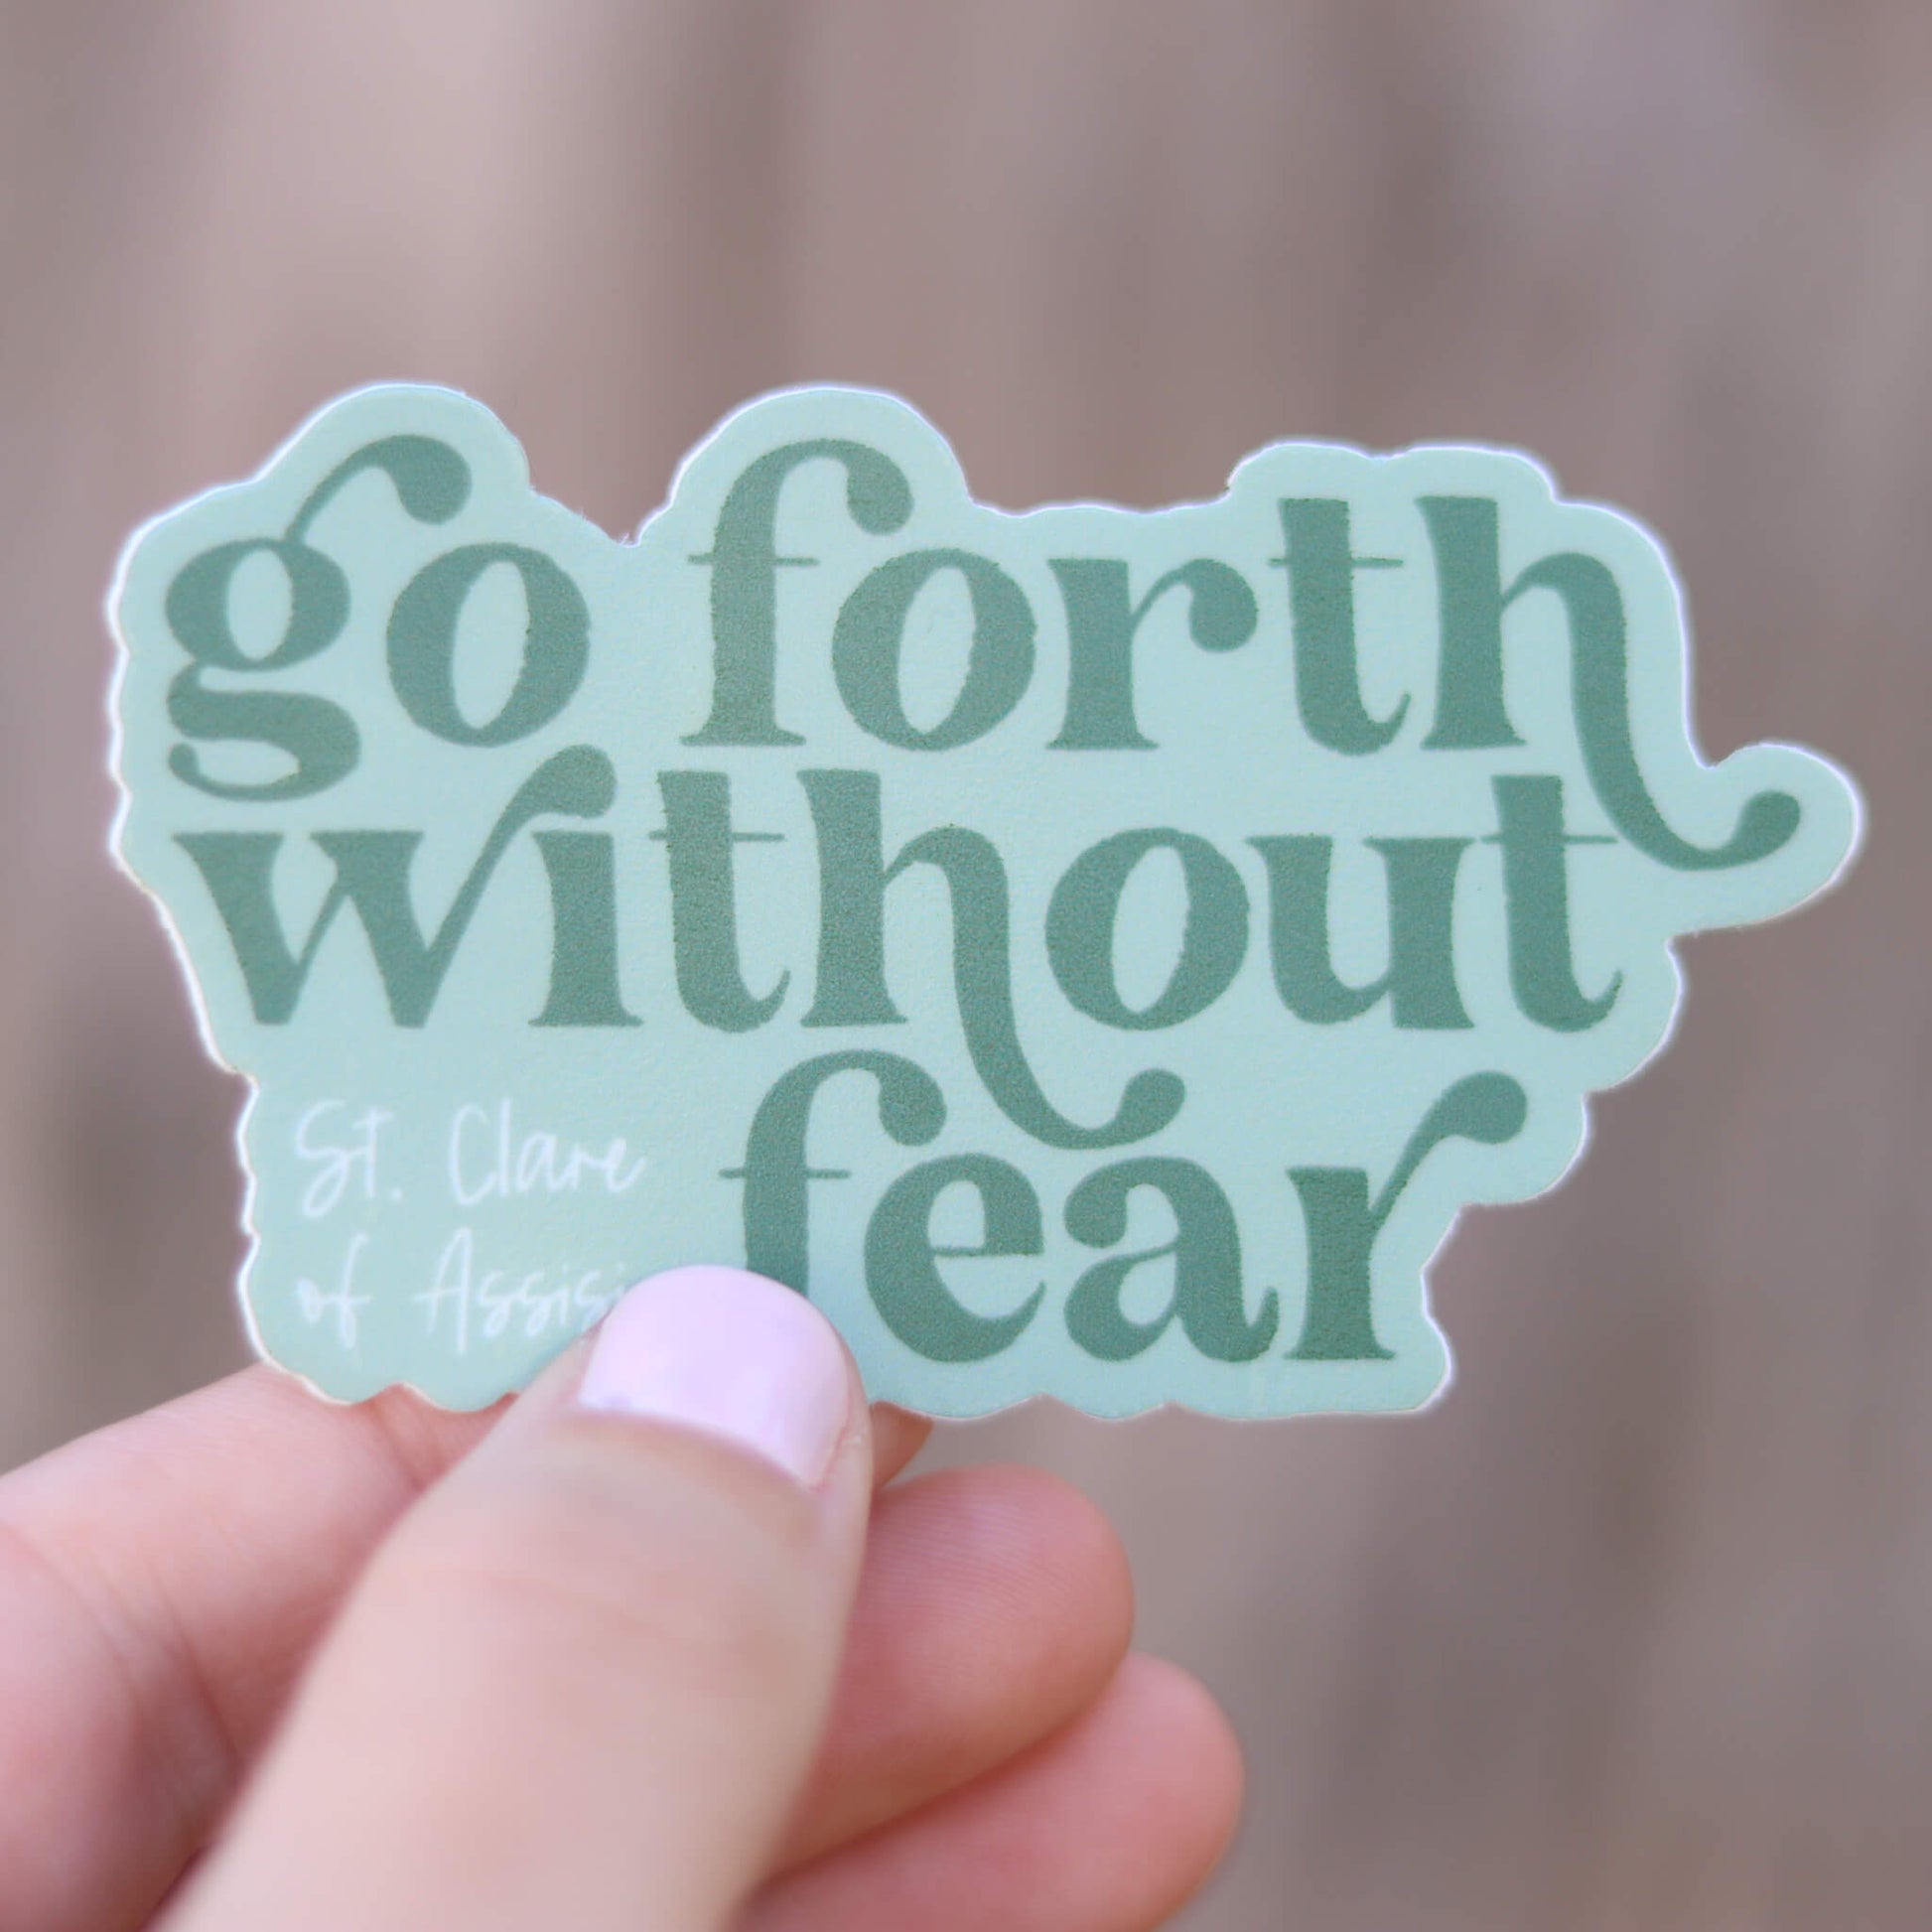 Go Forth Without Fear- St. Clare sticker